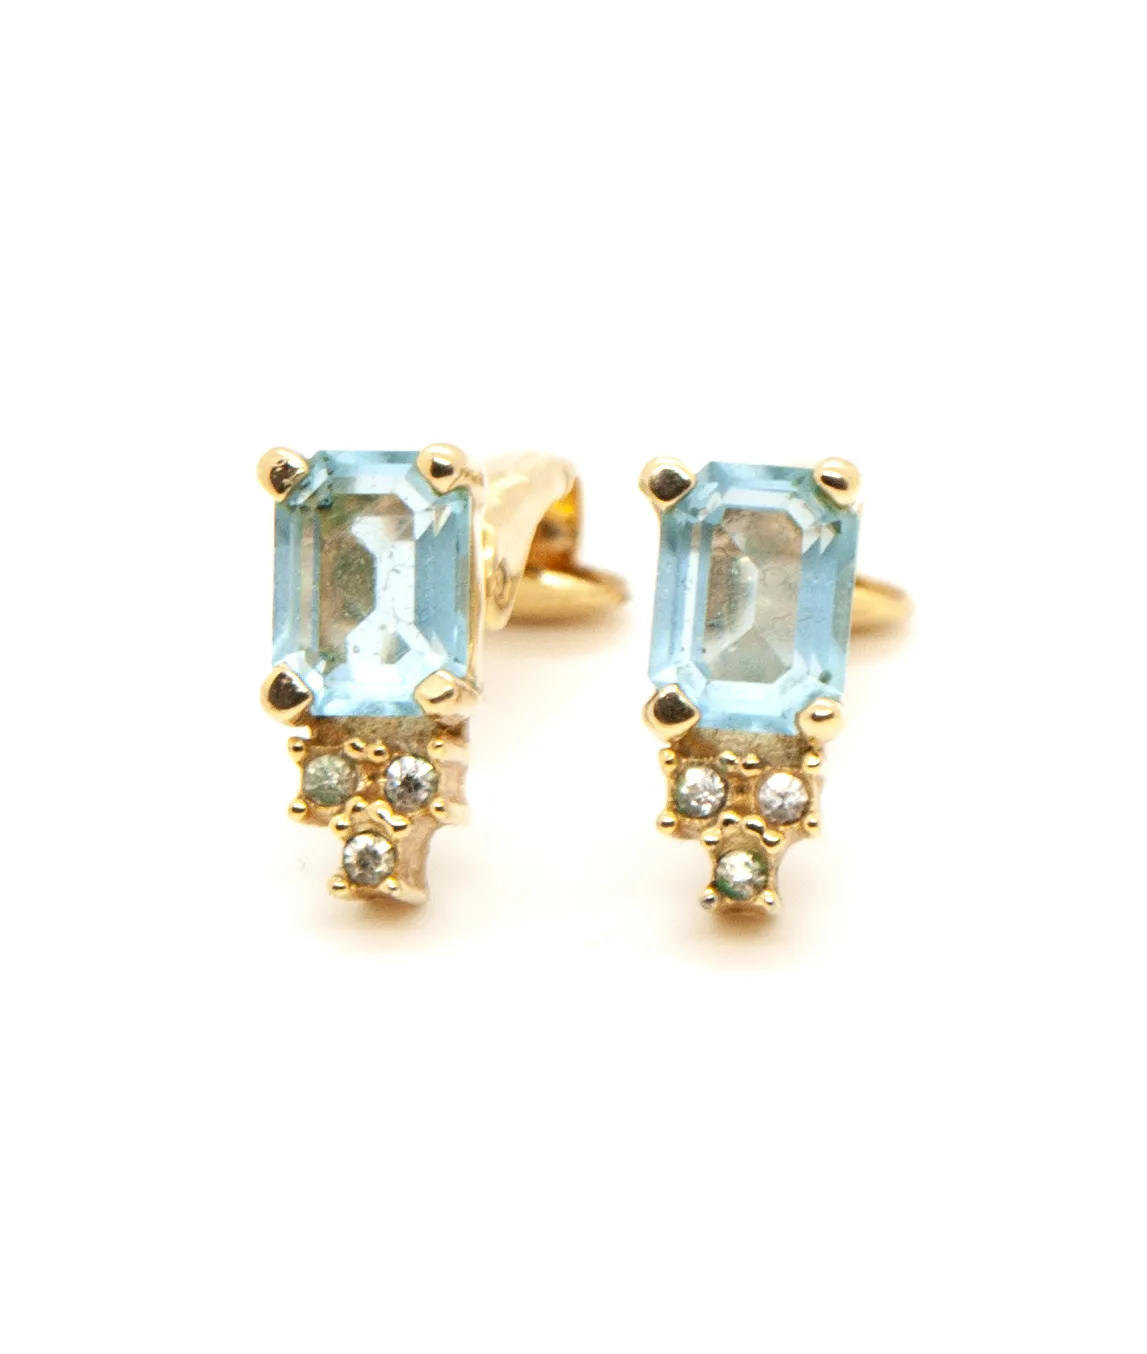 Aquamarine vintage clip on earrings by Christian Dior